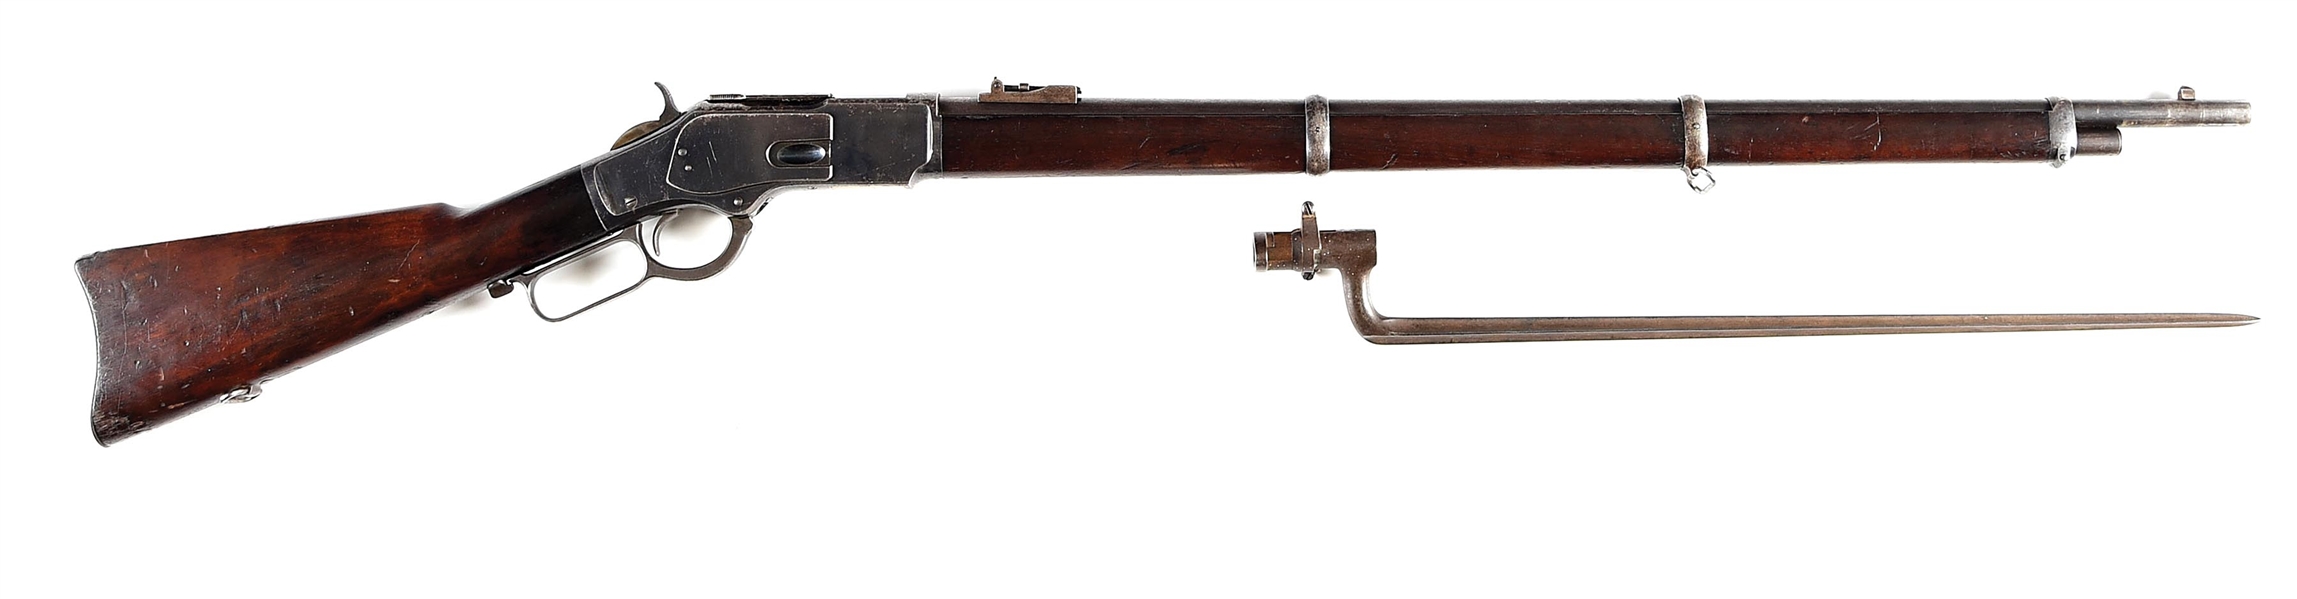 (A) WINCHESTER MODEL 1873 LEVER ACTION MUSKET WITH BAYONET.